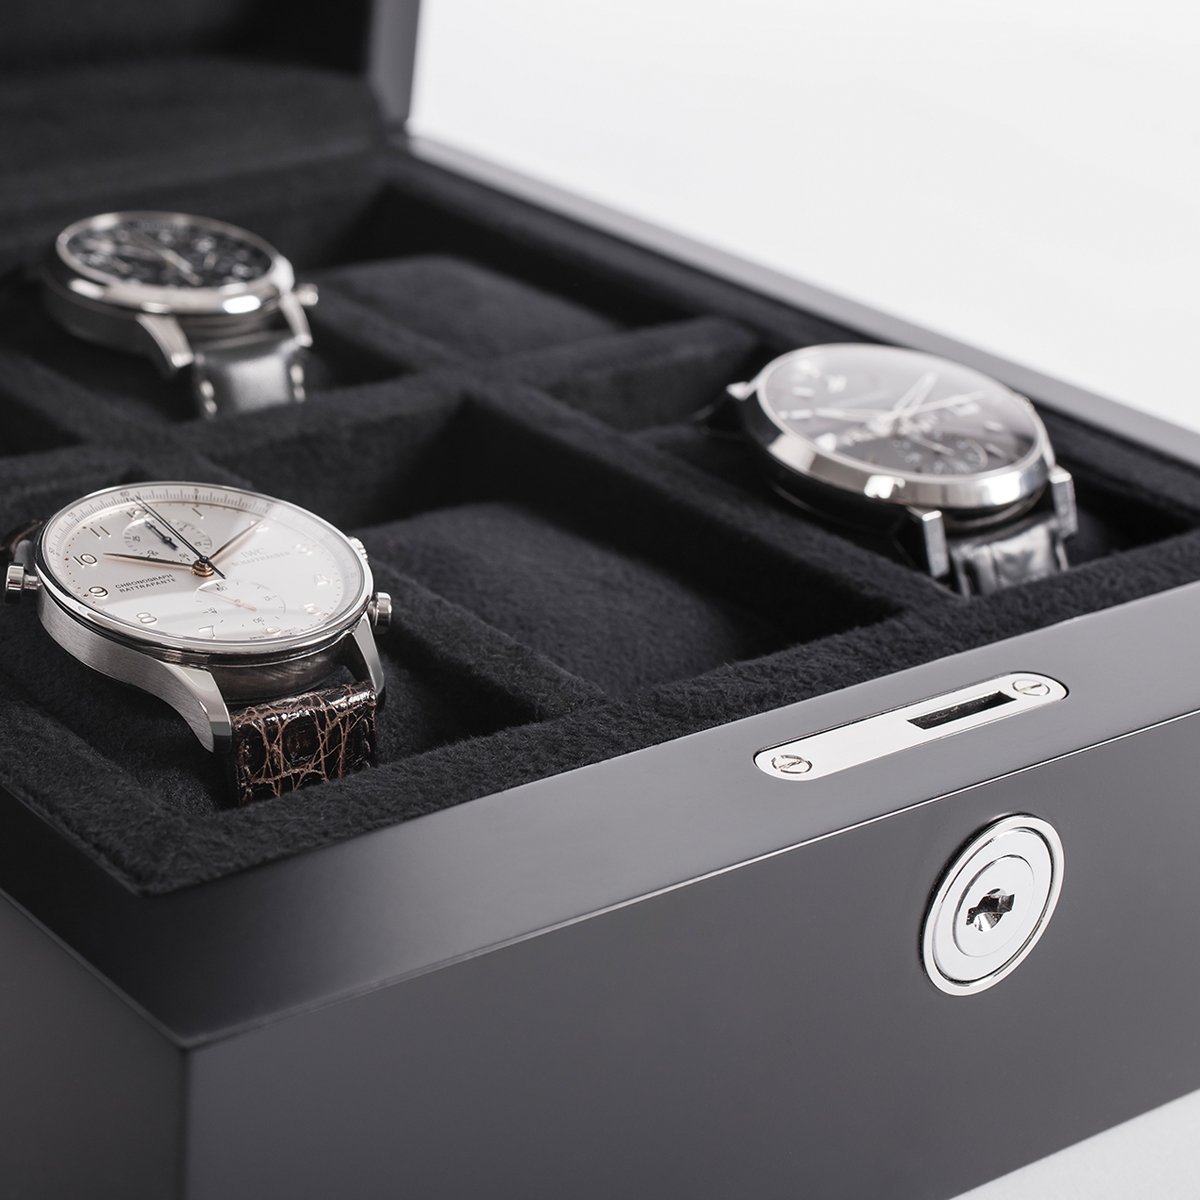 Neo 6 Watch Collection Case